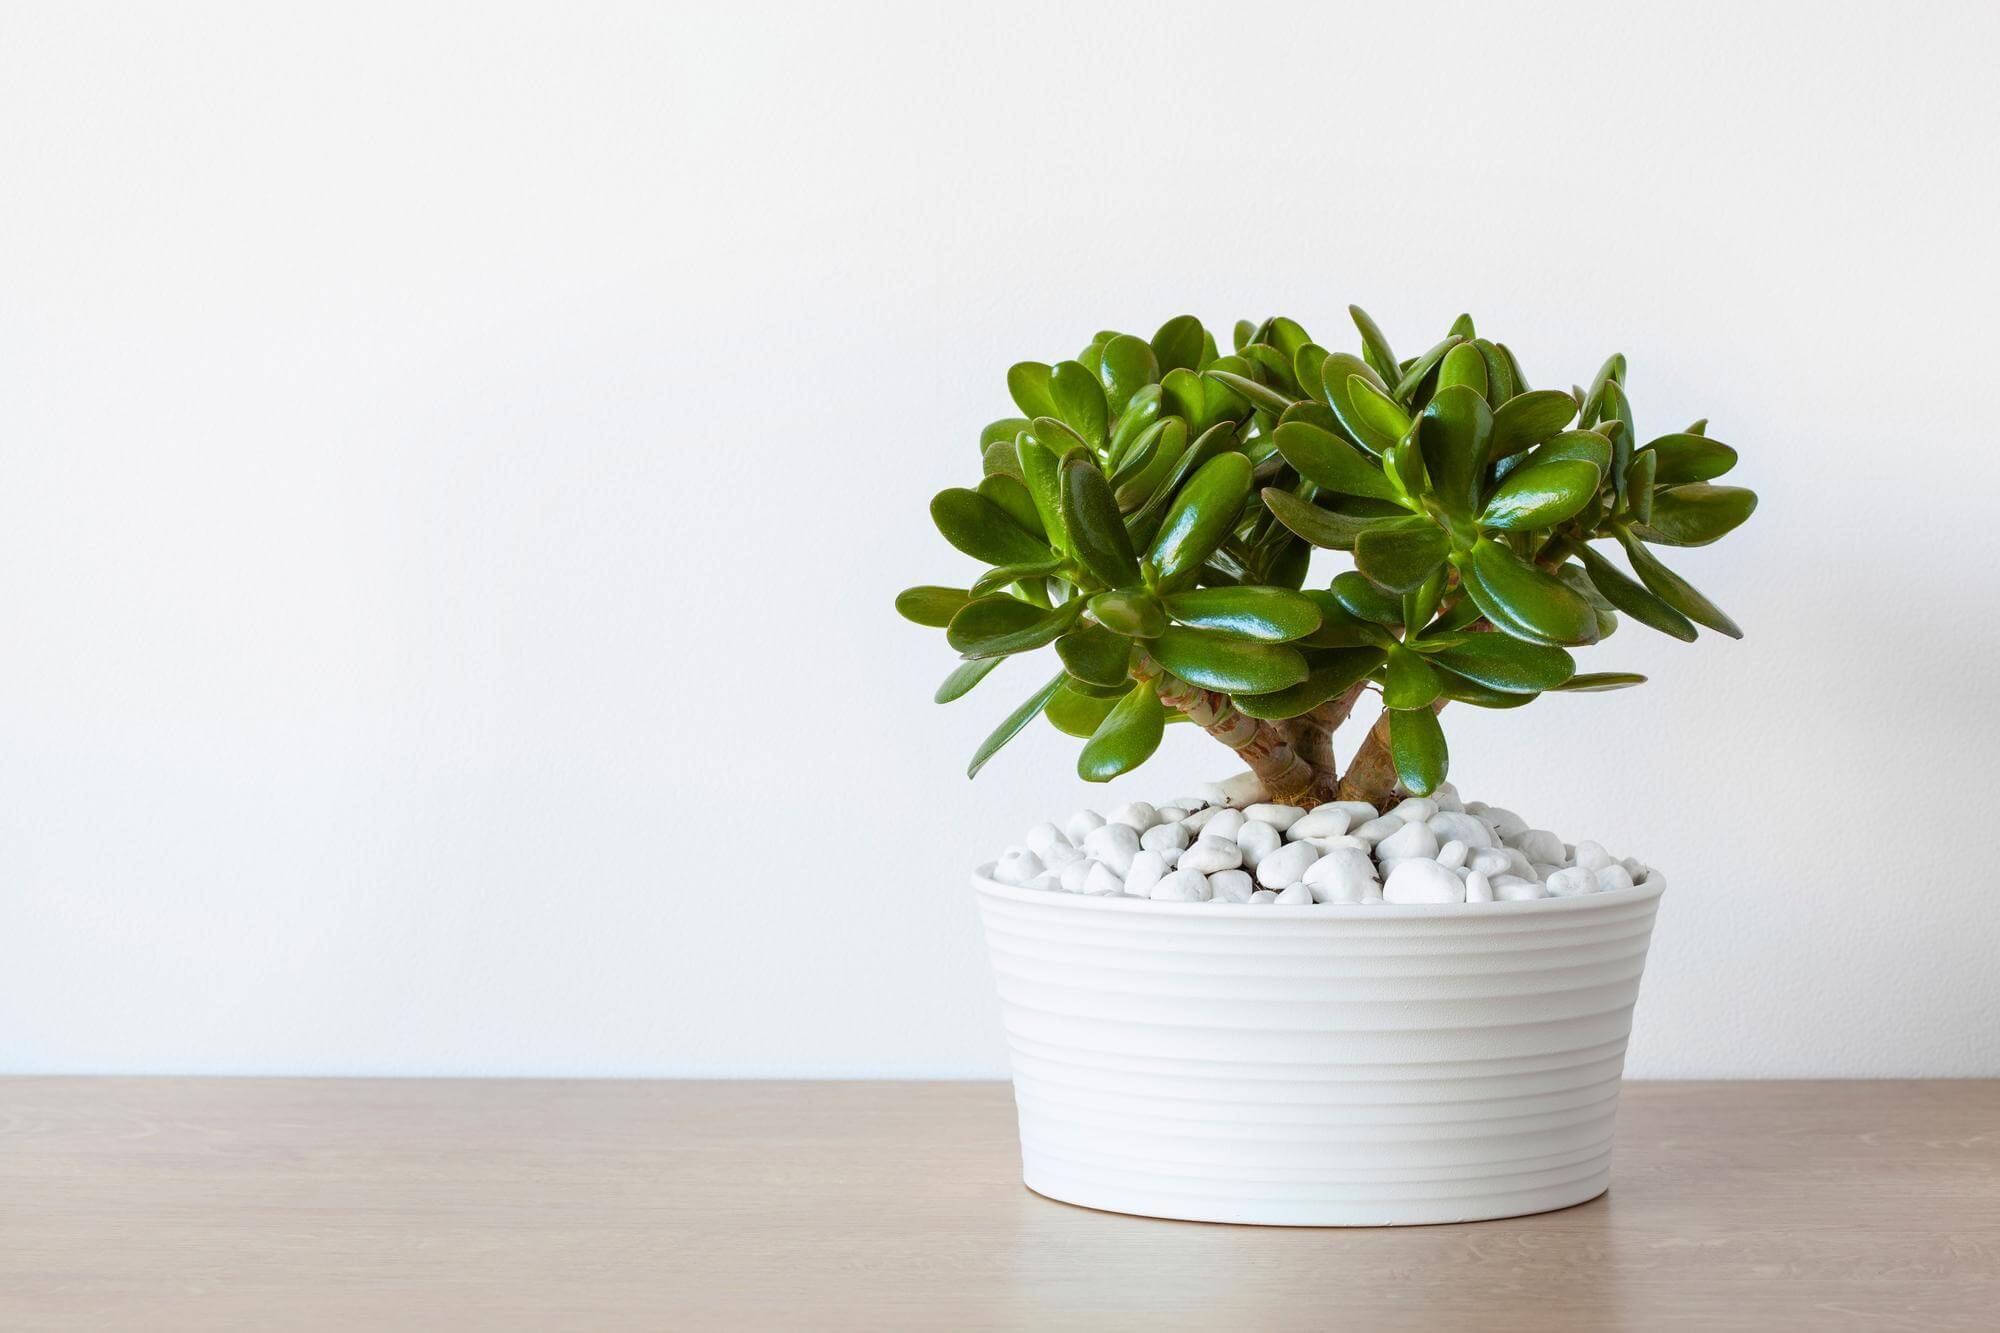 How to Care for a Jade Plant